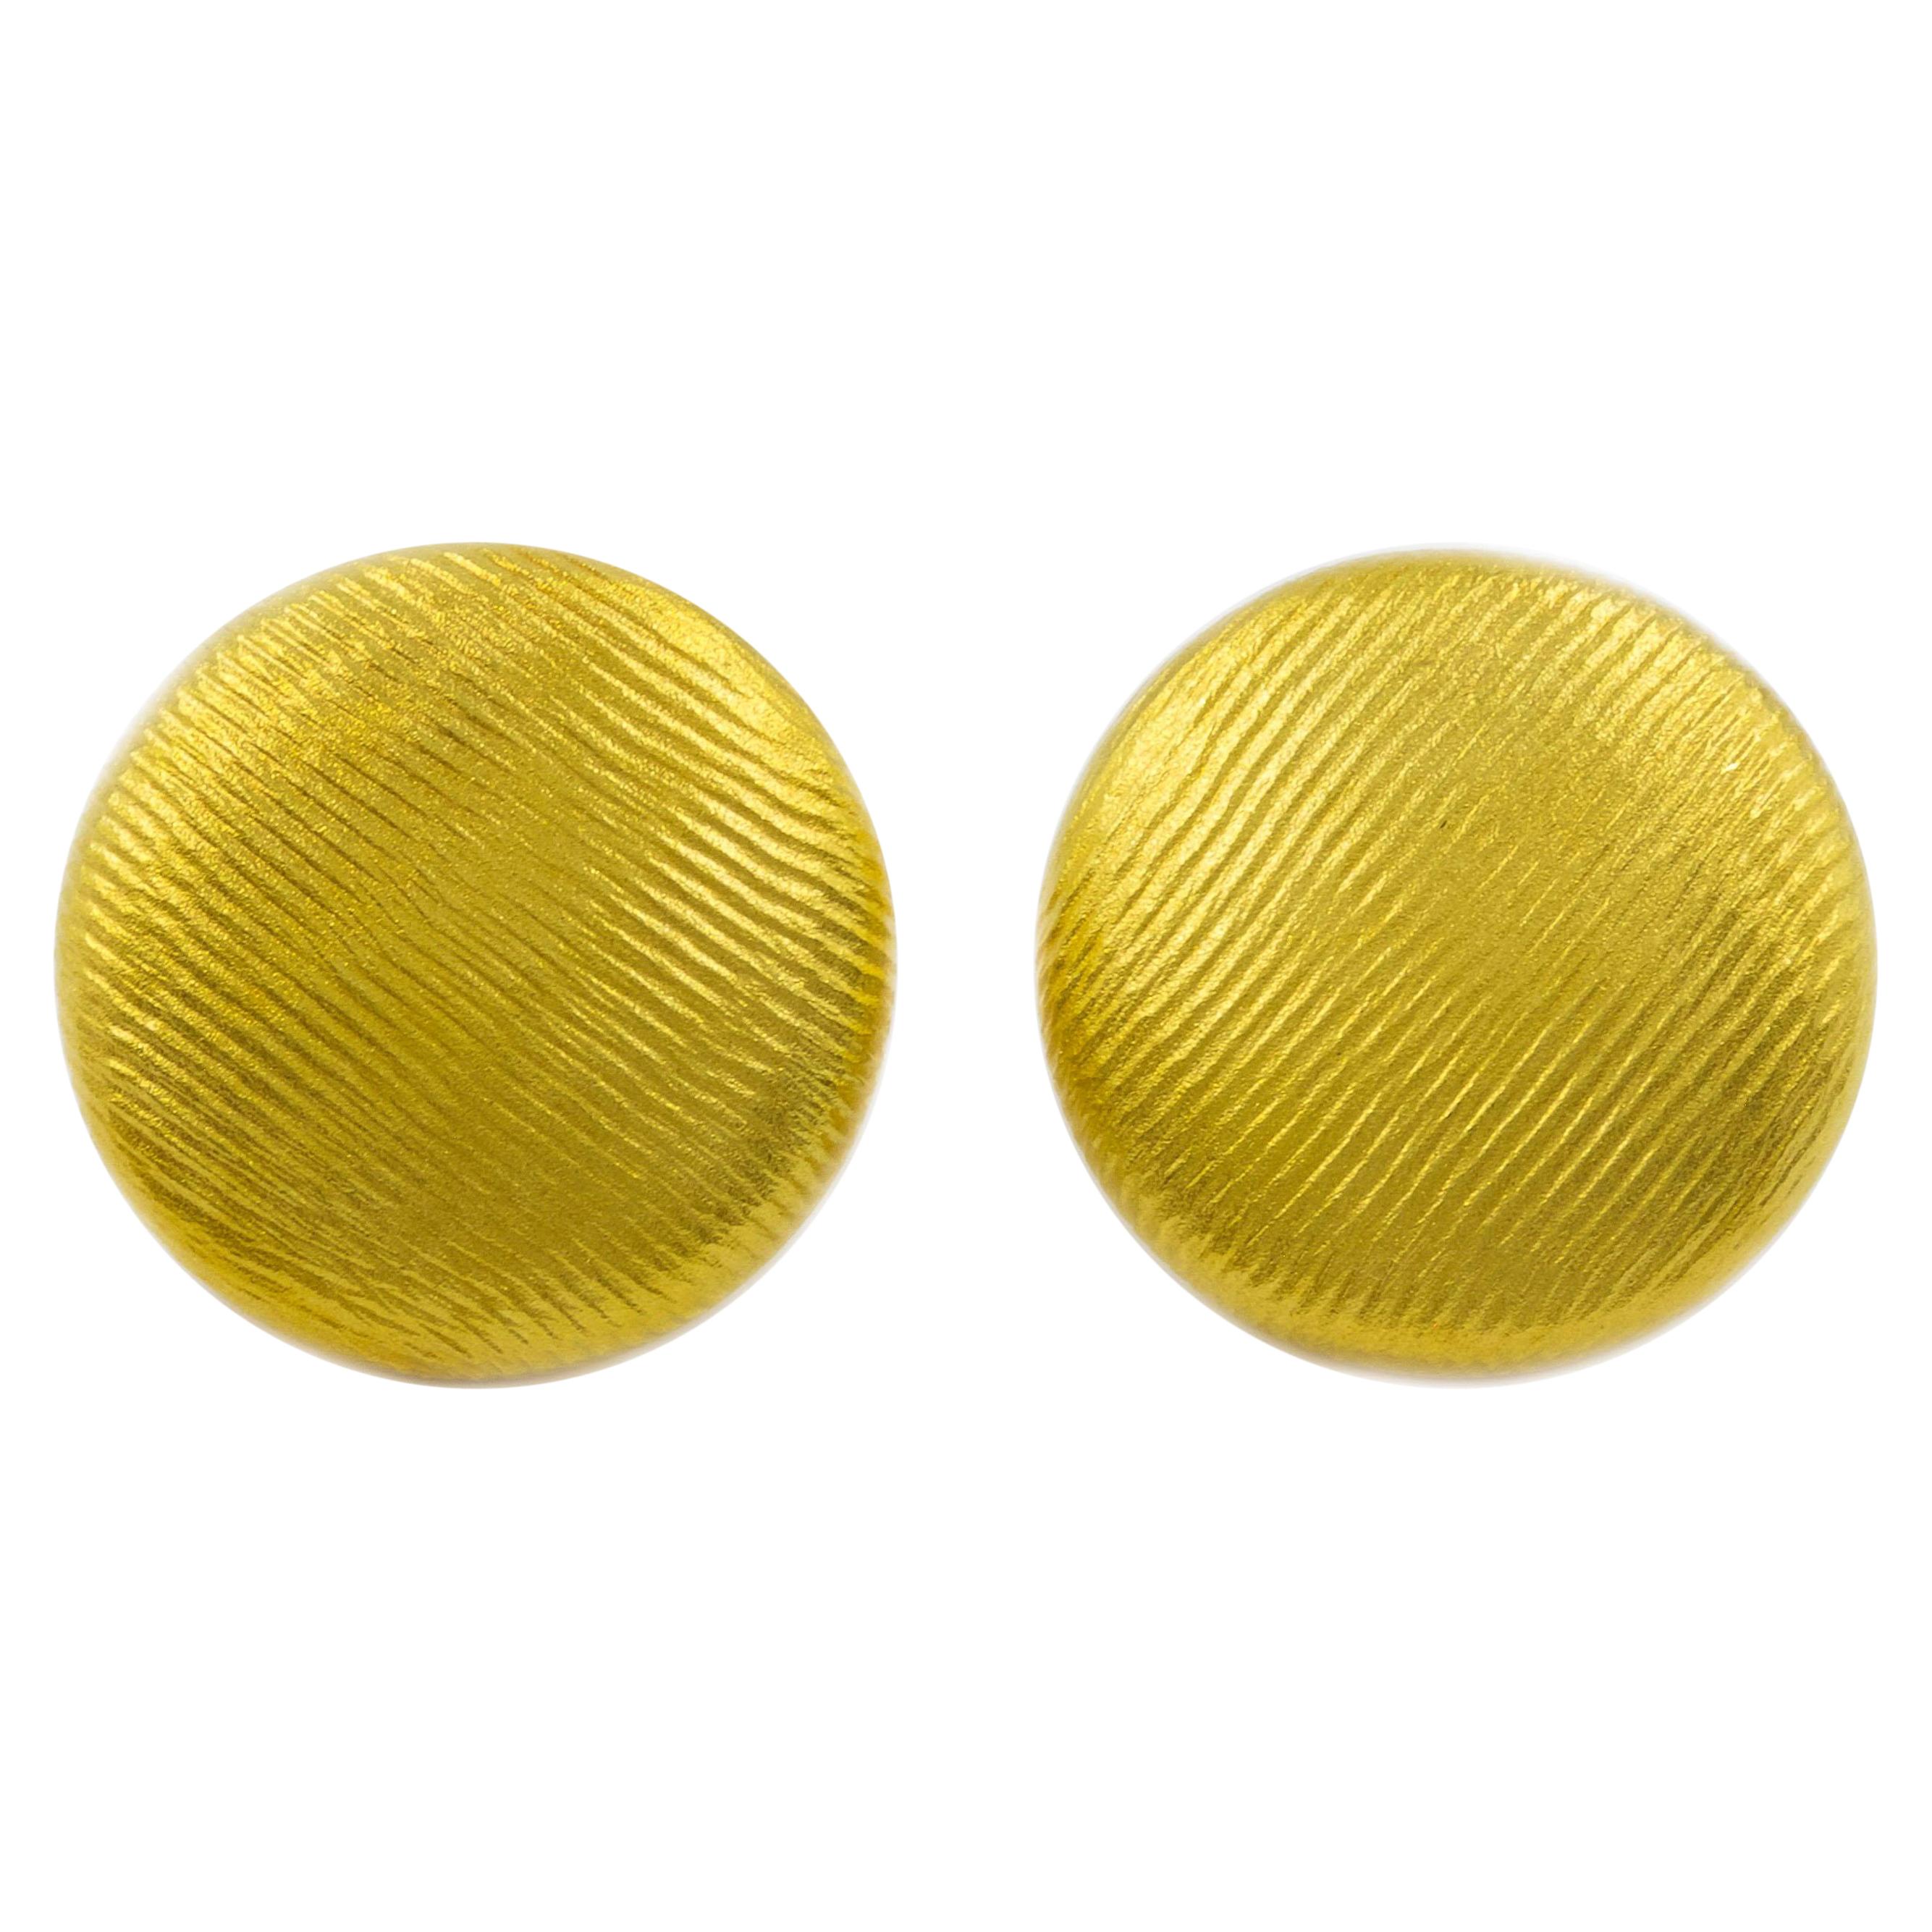 Pair of Ribbed Textured 18k Yellow Gold Round Circular Earrings by Paul Morelli